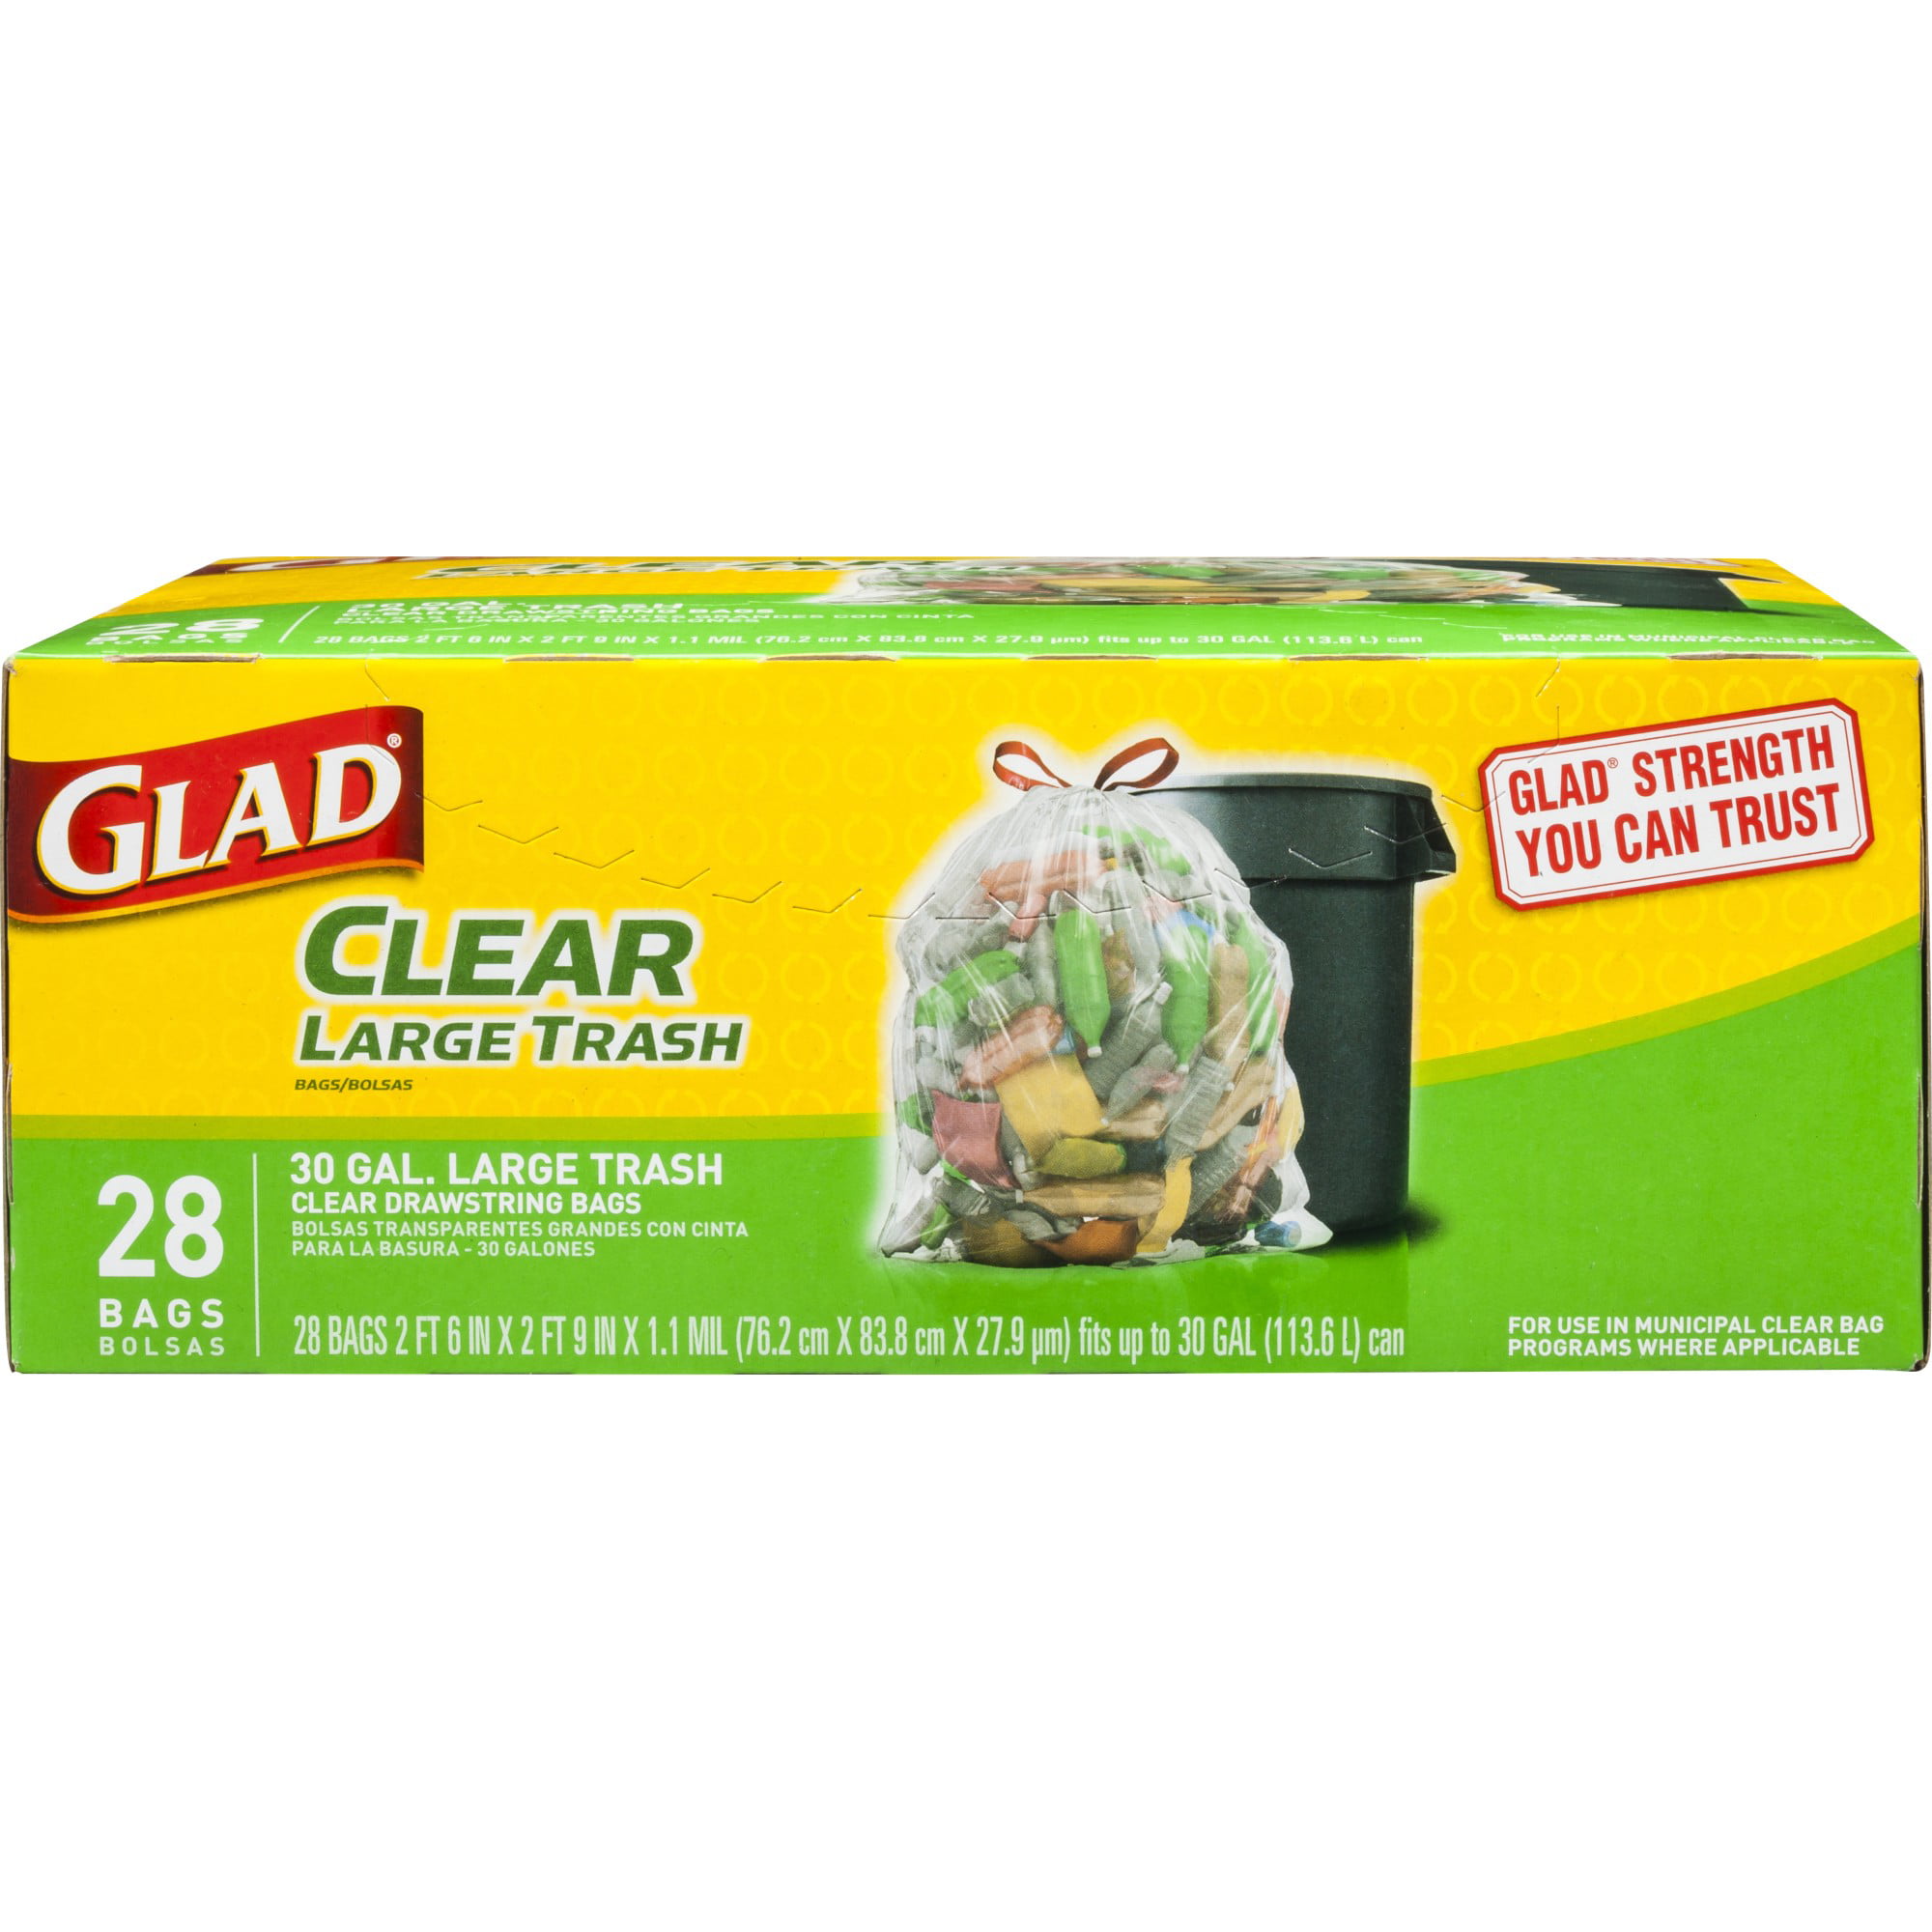 Glad Clear Recycling Large Trash Bags 30 Gallon 28 Bags Walmart com 